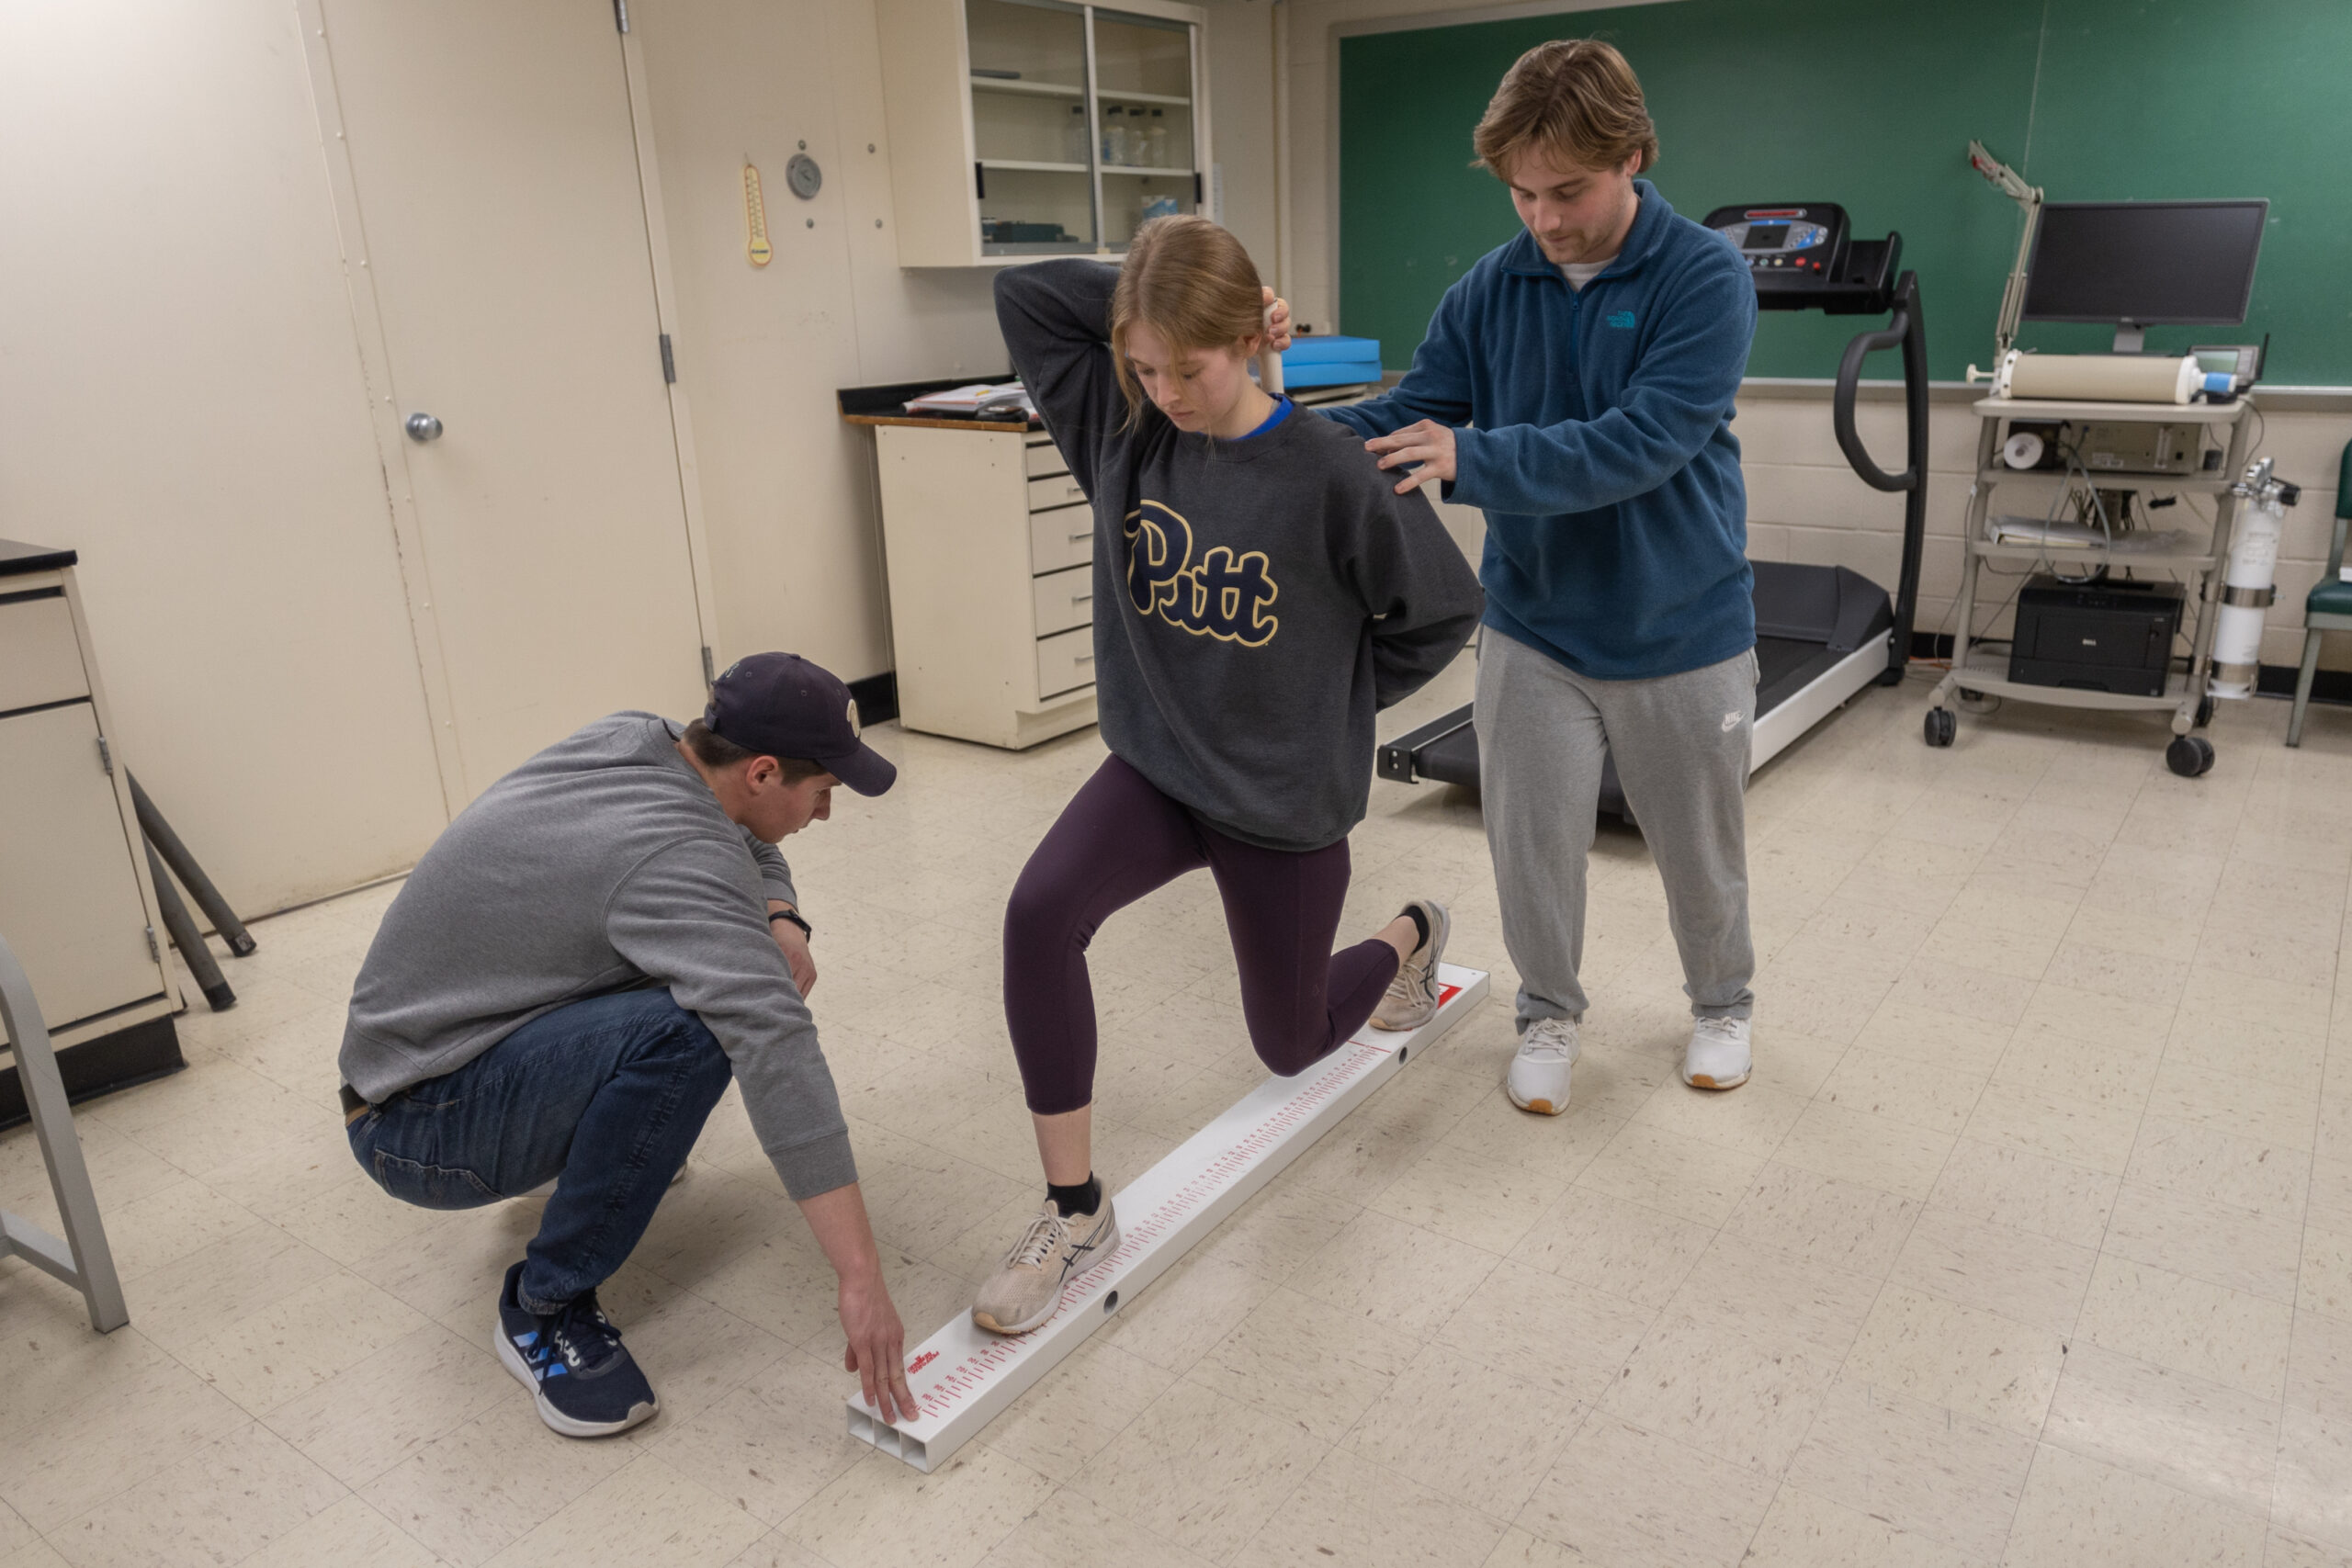 People doing an exercise science measurement activity